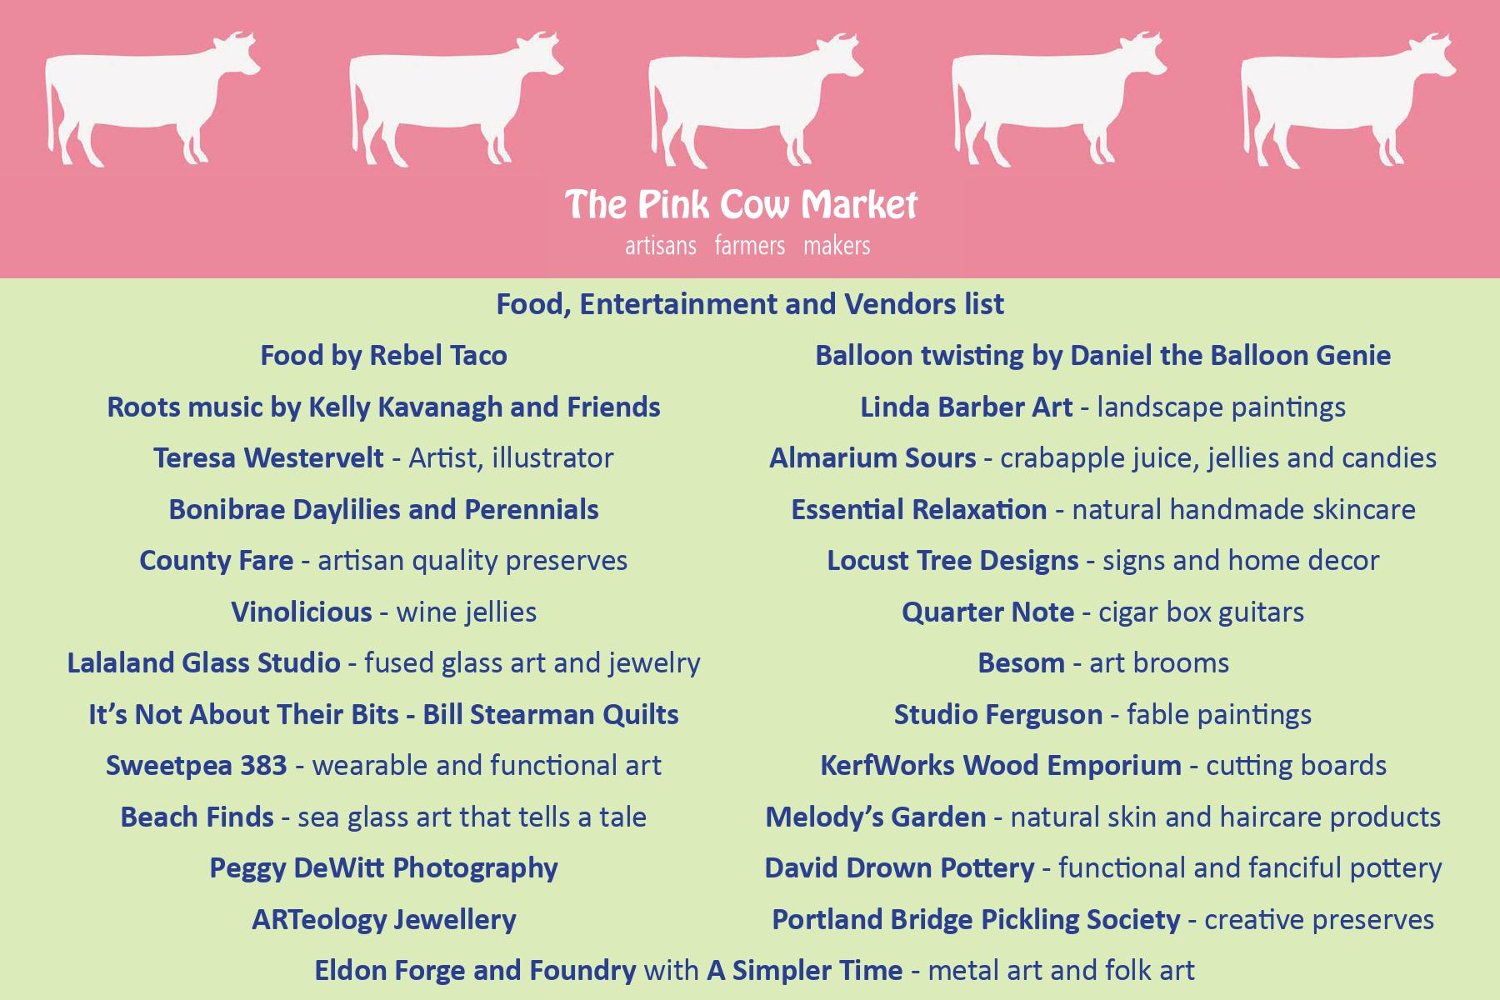 The Pink Cow Market